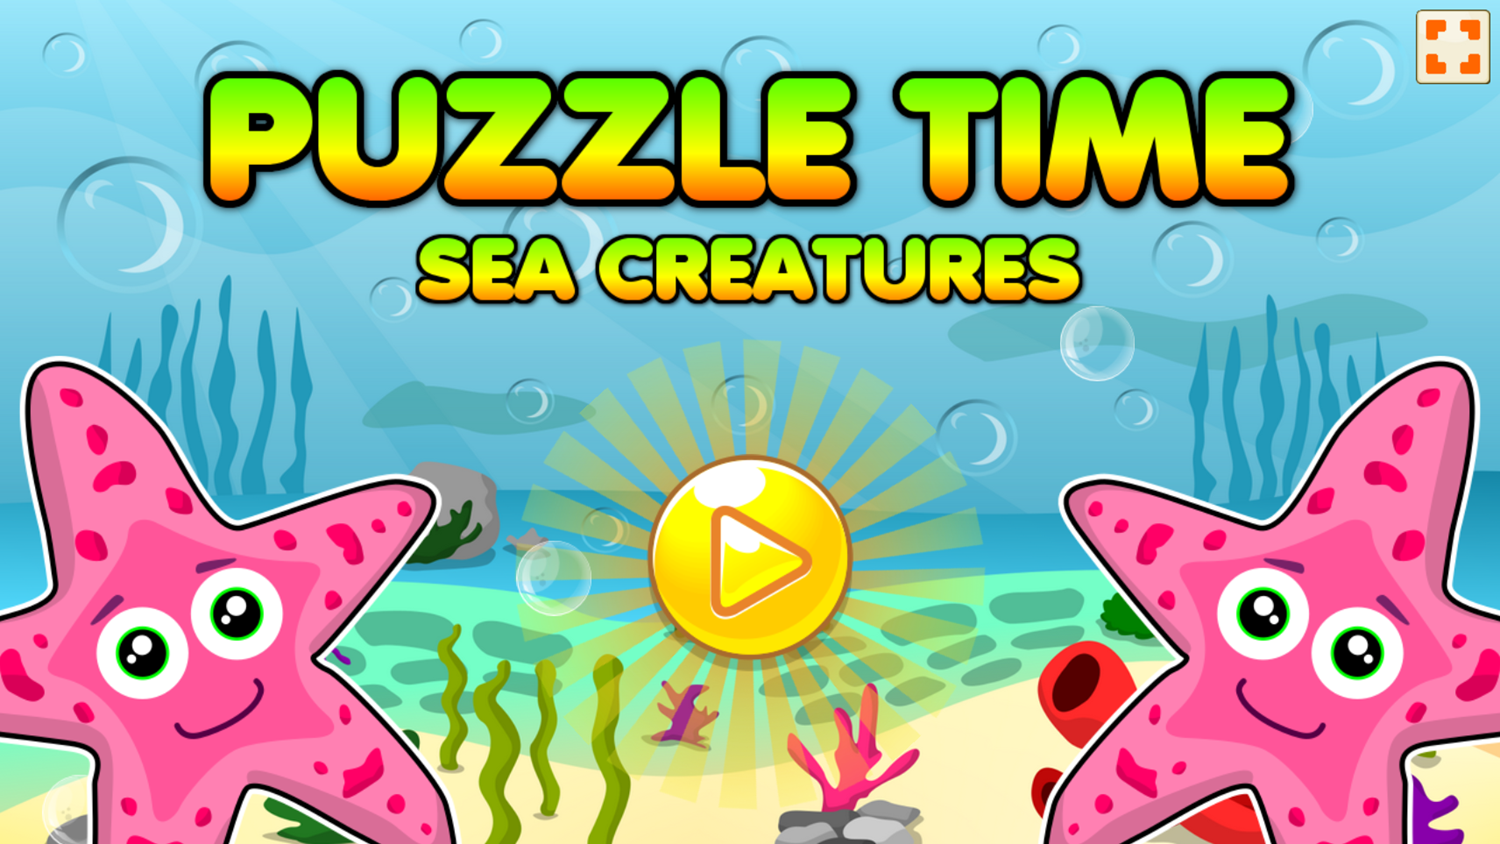 Puzzle Time Sea Creatures Game Welcome Screen Screenshot.